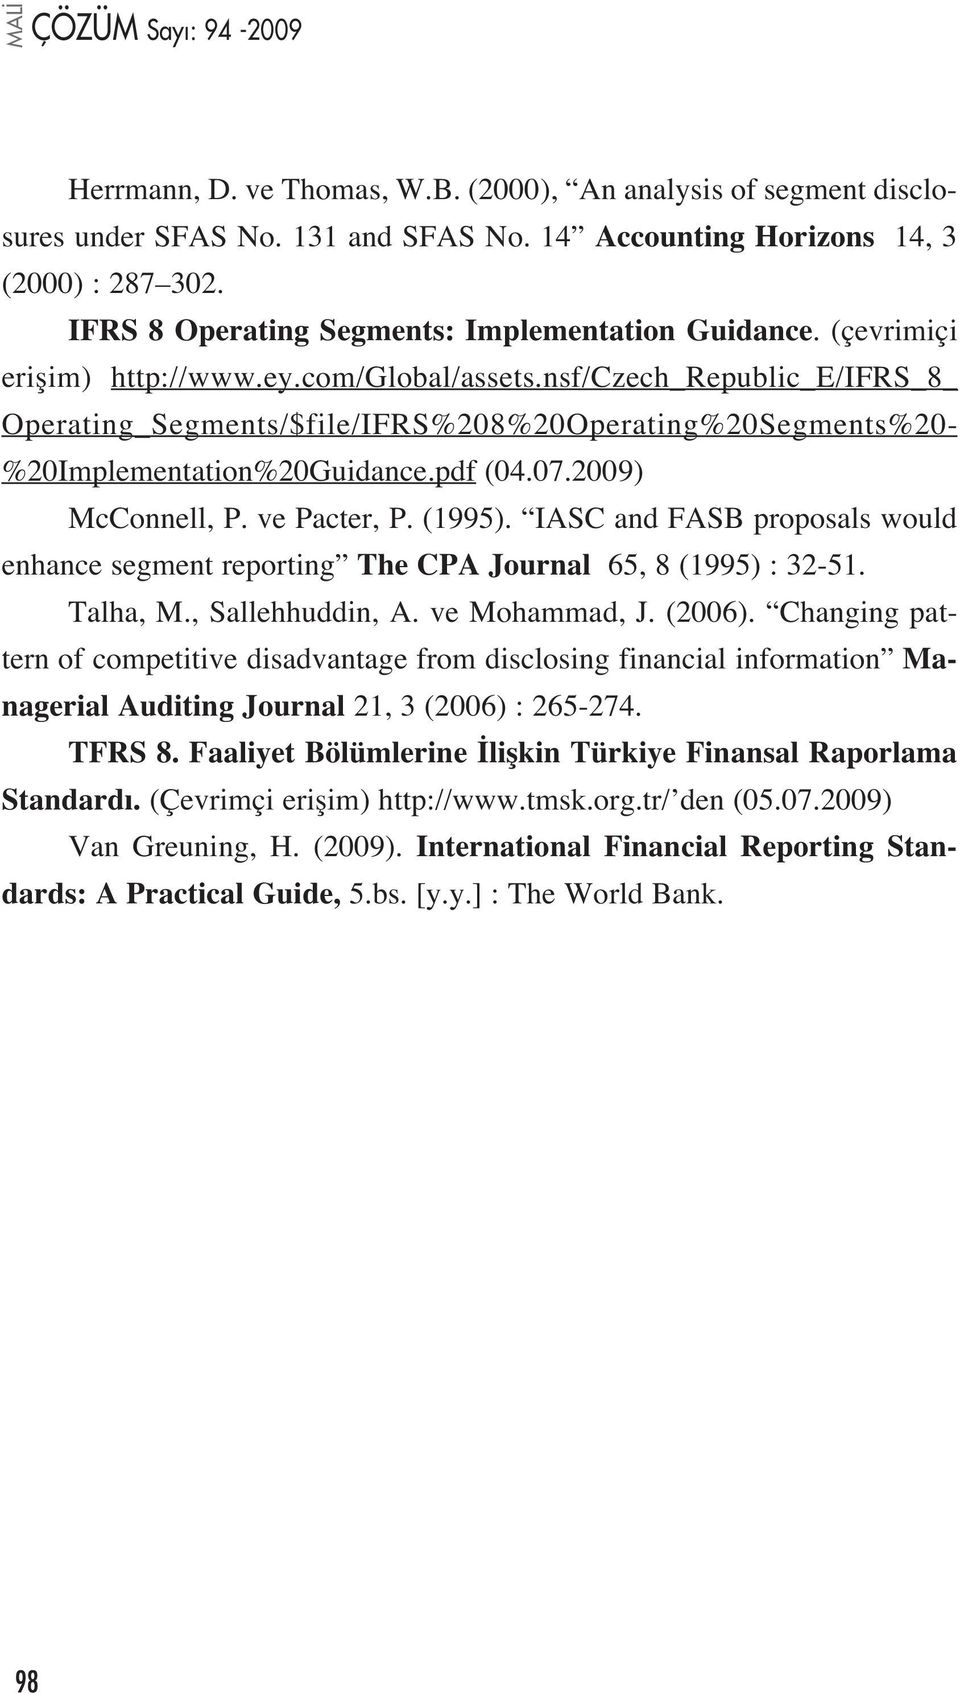 nsf/czech_republic_e/ifrs_8_ Operating_Segments/$file/IFRS%208%20Operating%20Segments%20- %20Implementation%20Guidance.pdf (04.07.2009) McConnell, P. ve Pacter, P. (1995).